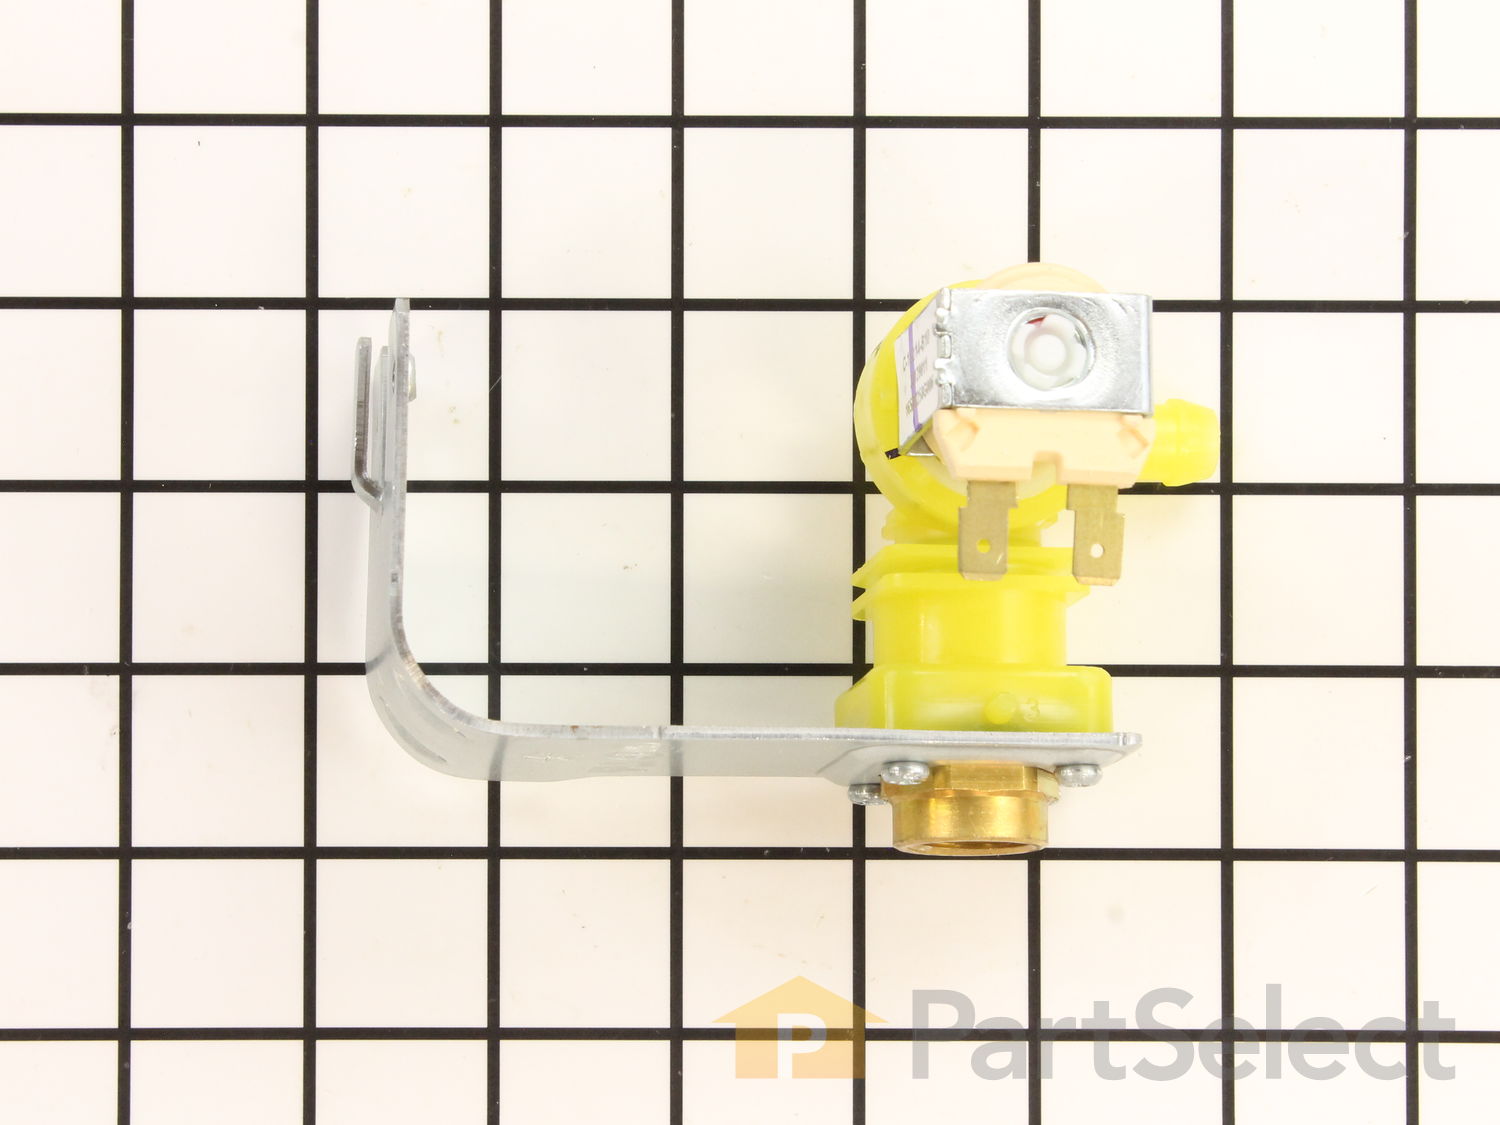 Details about   WD15X10014 Water Valve for GE Dishwasher free shipping